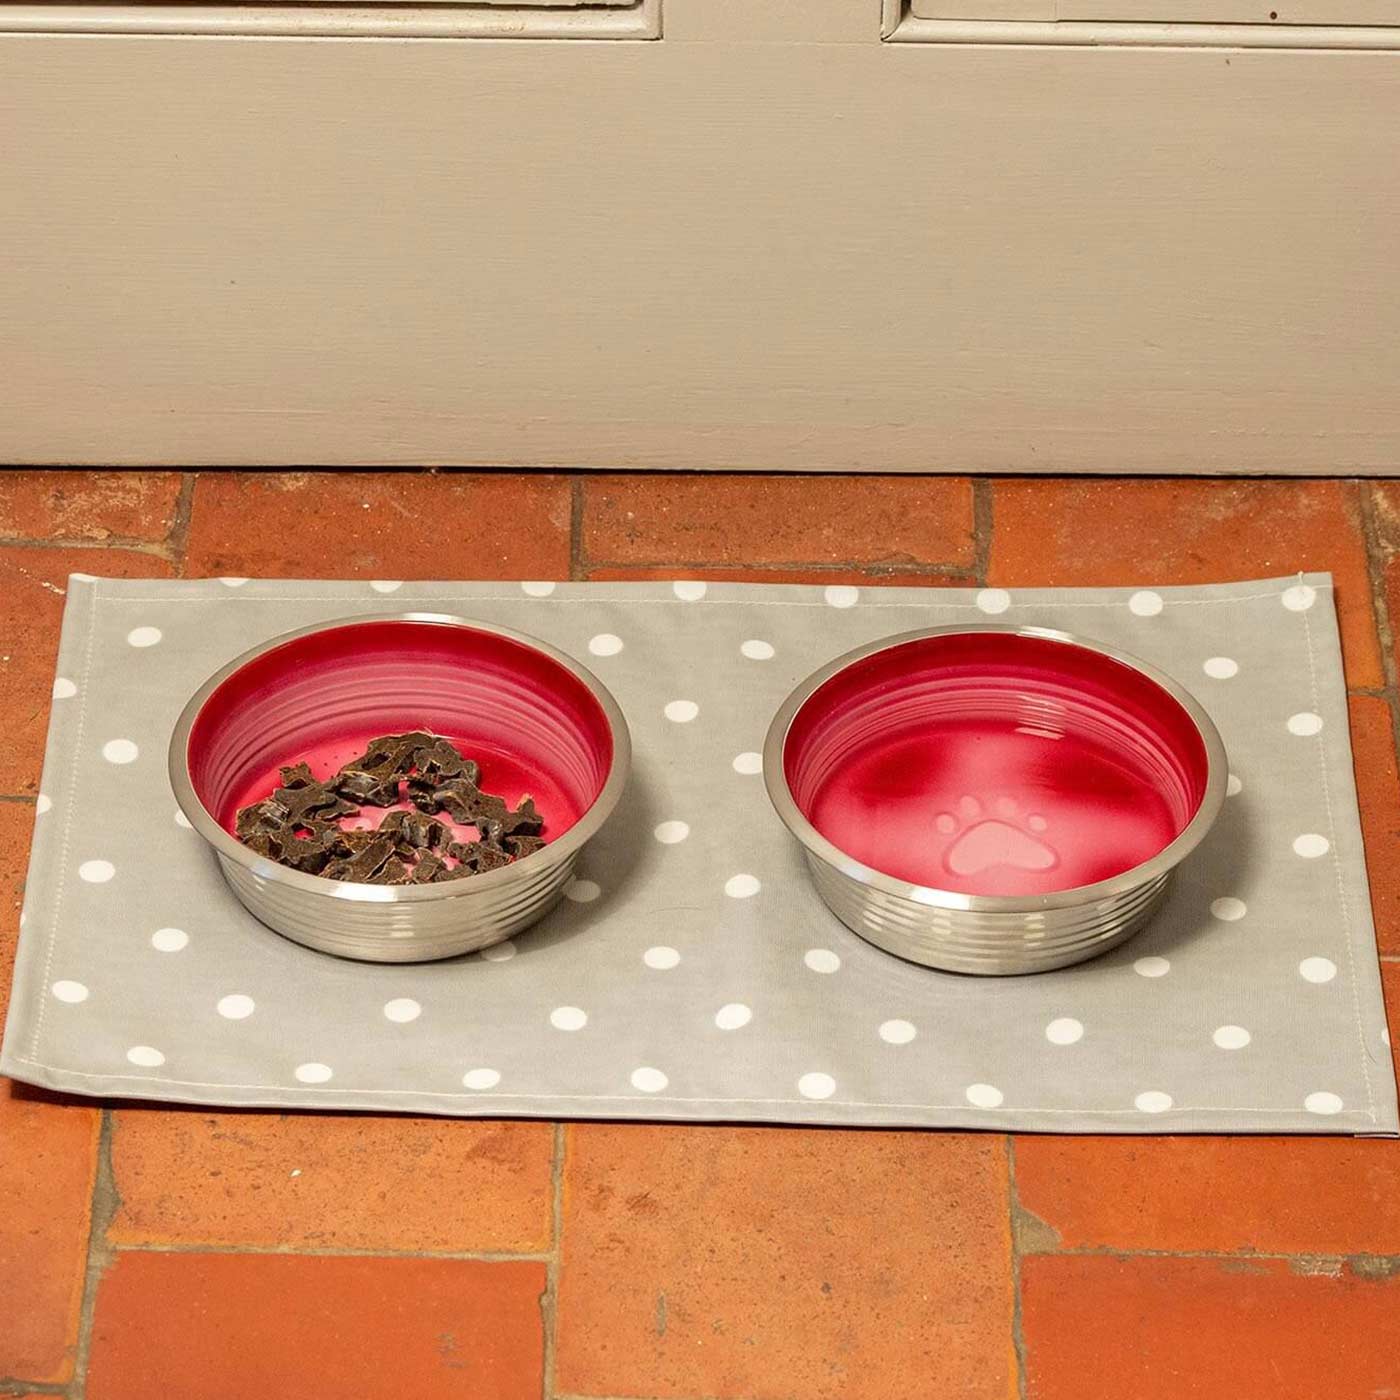 [color:grey spot] Discover Pet Feeding Placemat in Grey Spot. Available at Lords and Labradors US